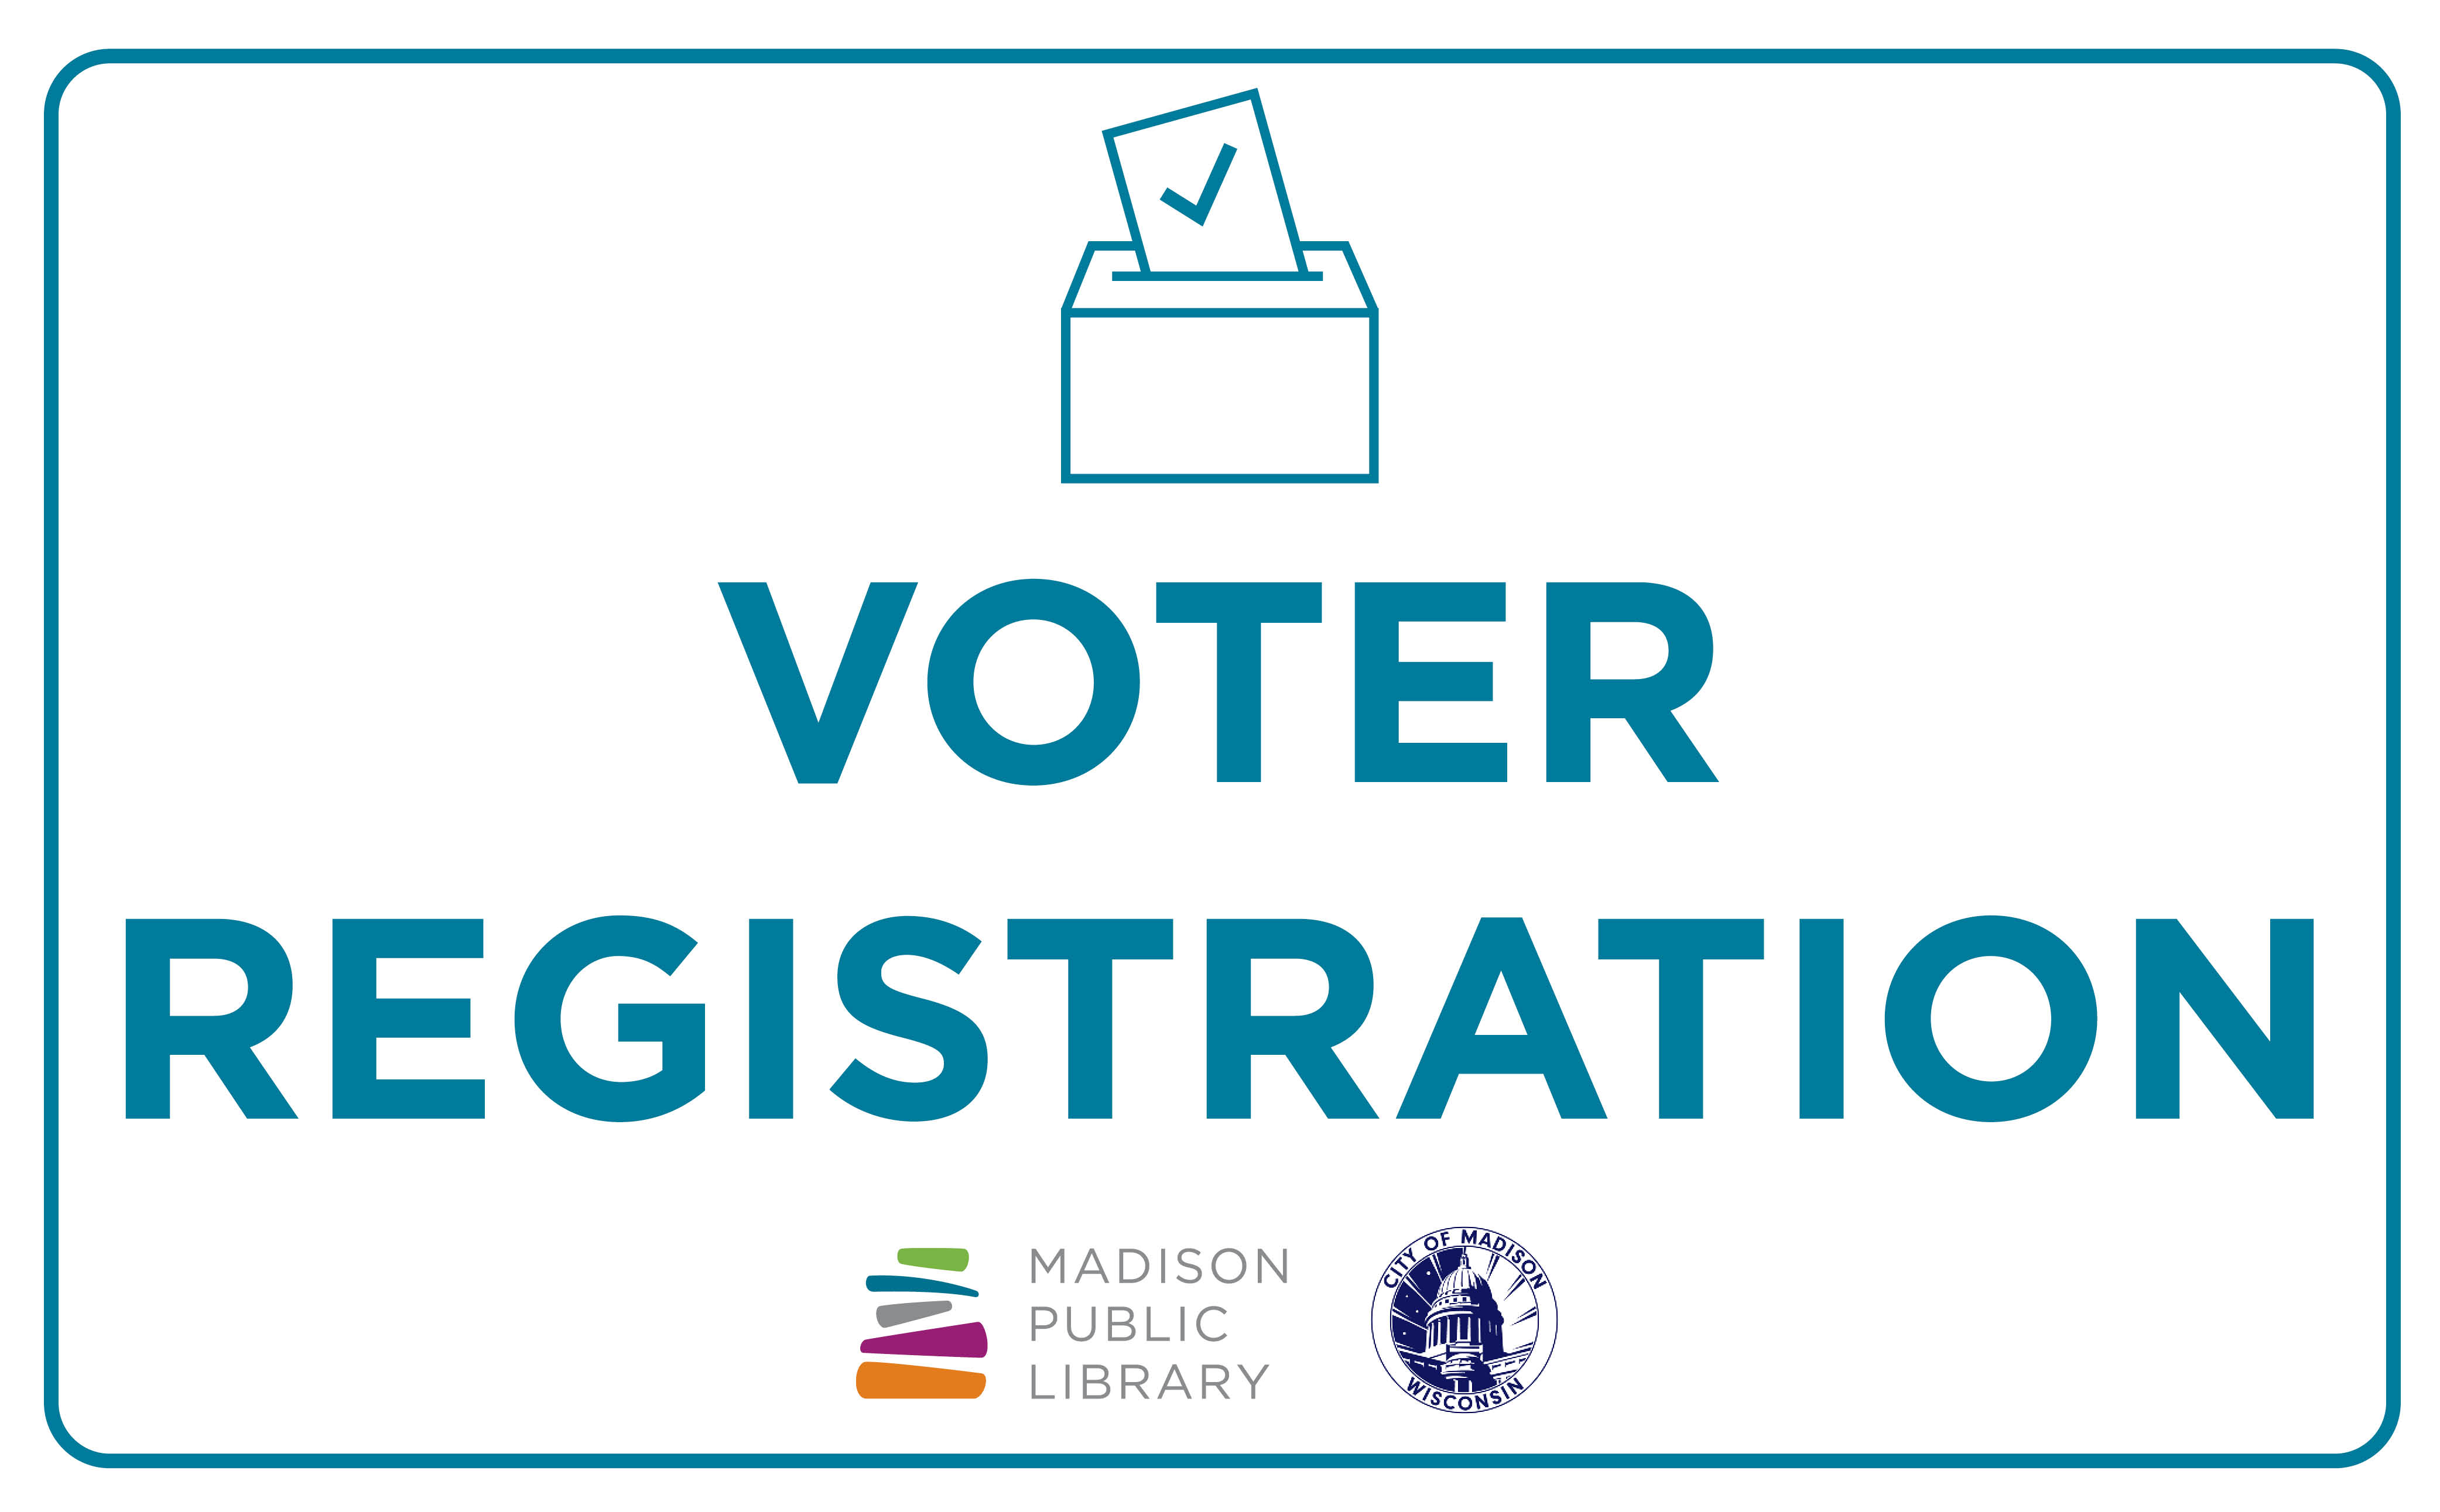 Voter Registration at Madison Public Library